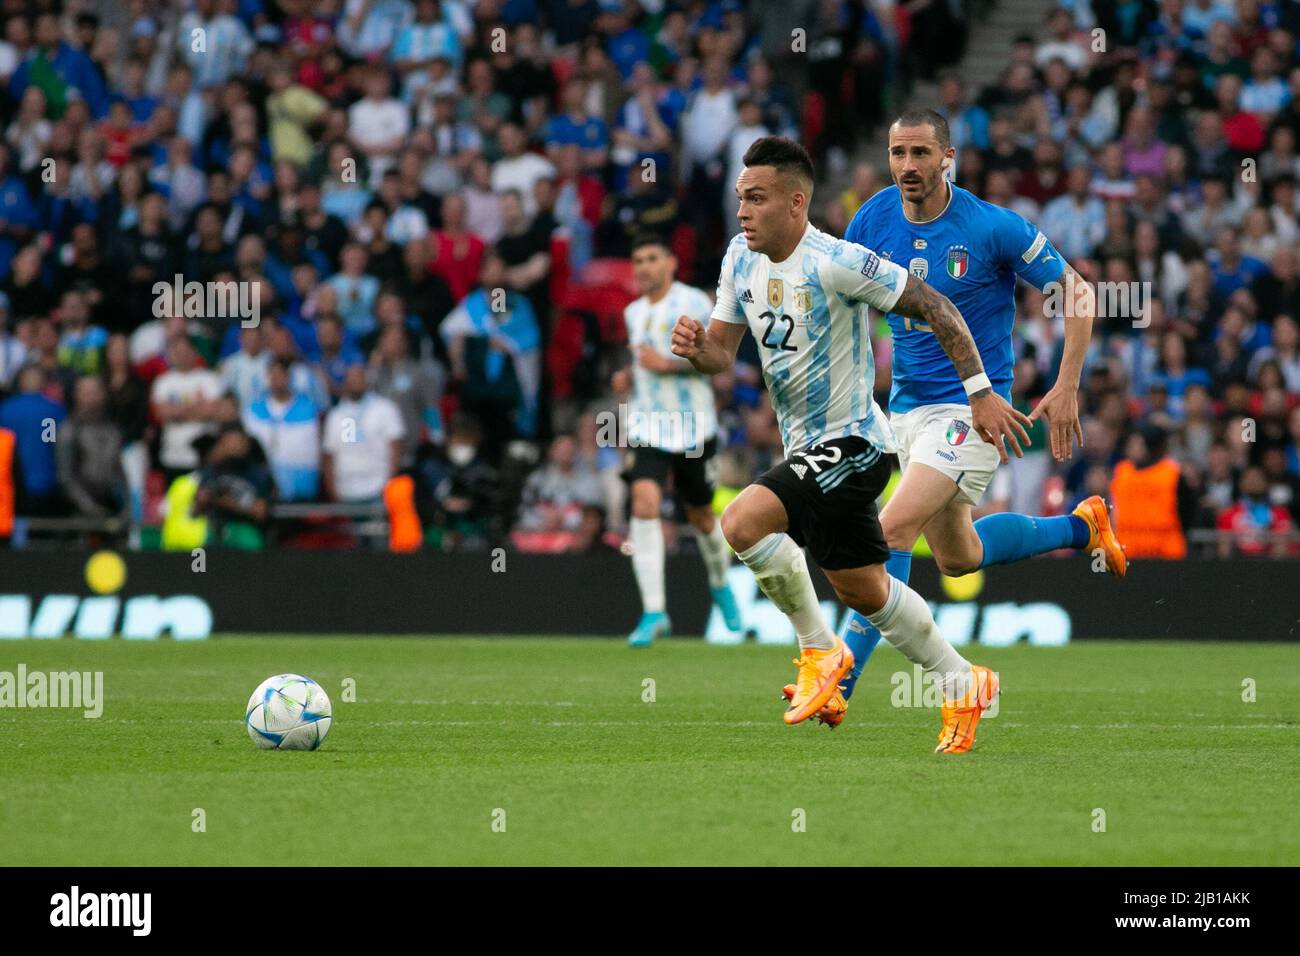 Lautaro Martinez of Argentina in action during the Italy v Argentina - Finalissima 2022 match at Wembley Stadium on June 1, 2022 in London, England. (MB Media) Stock Photo